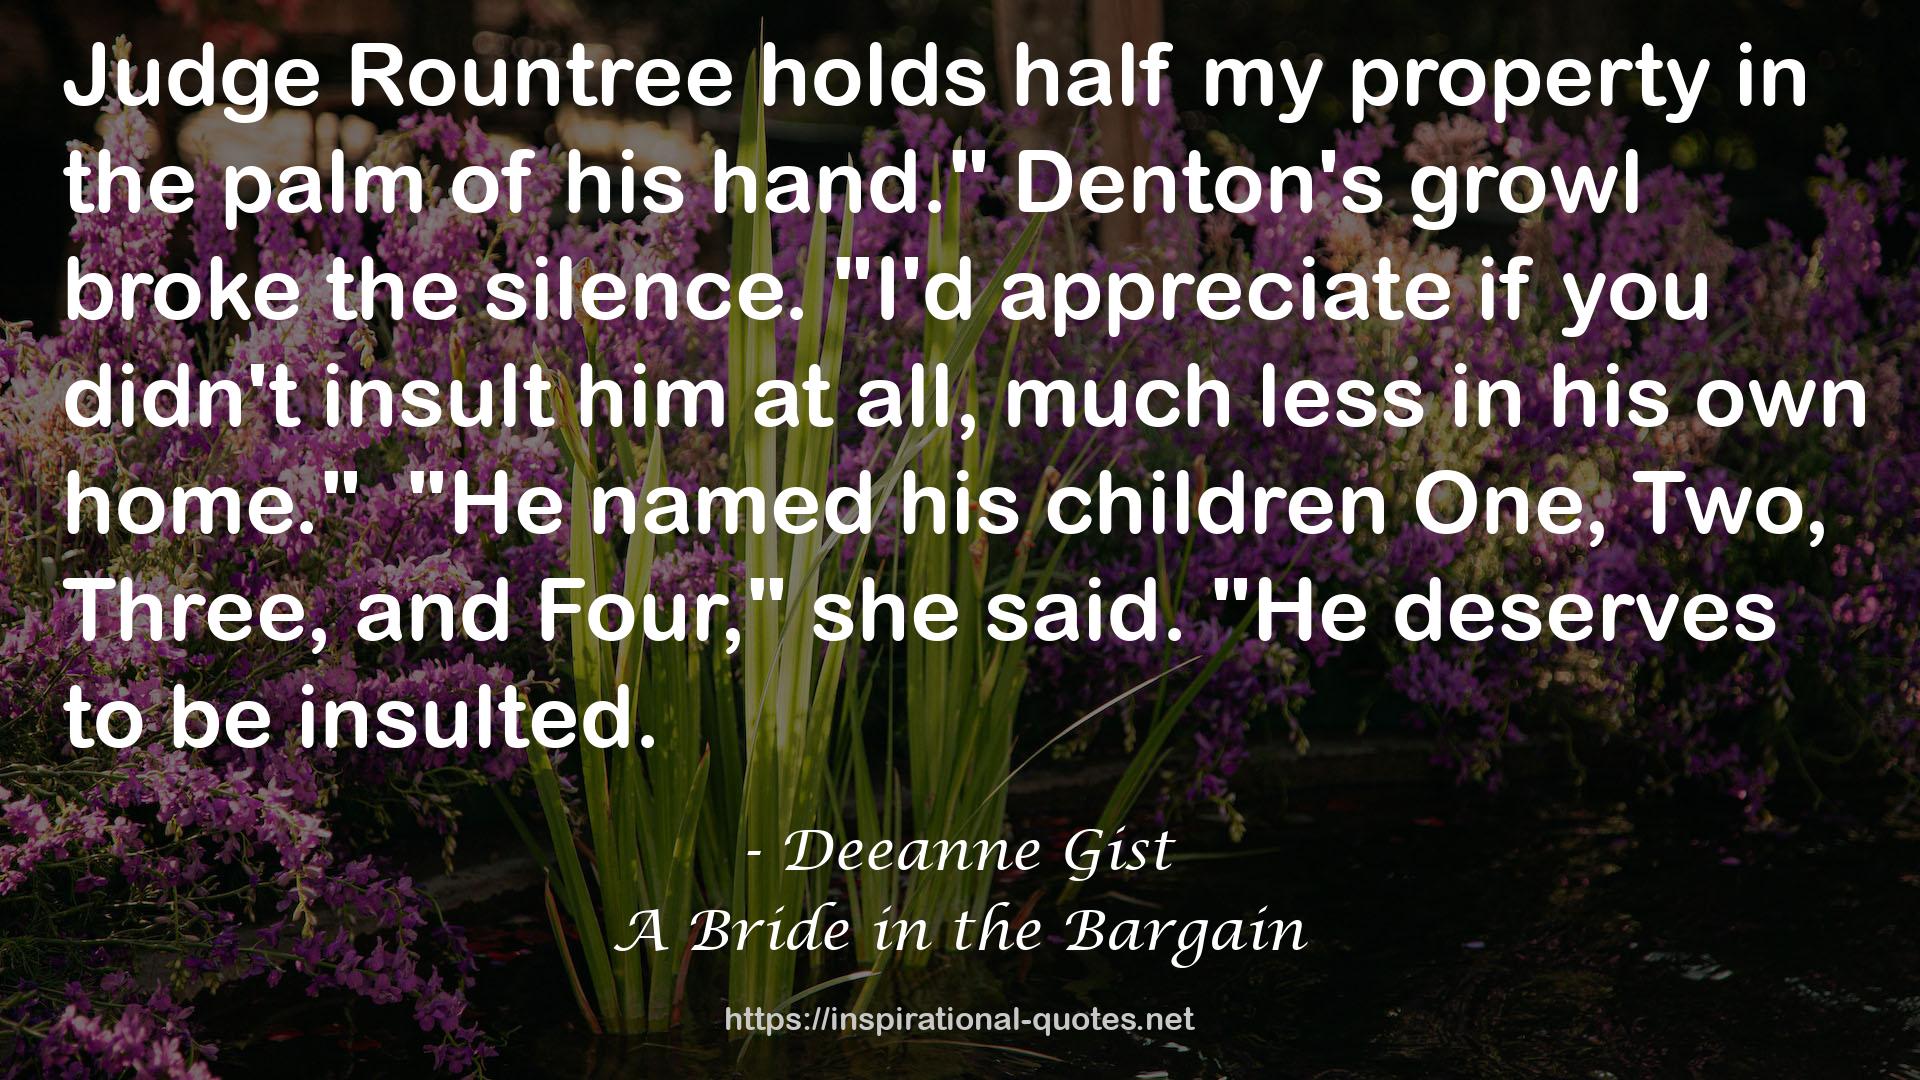 A Bride in the Bargain QUOTES